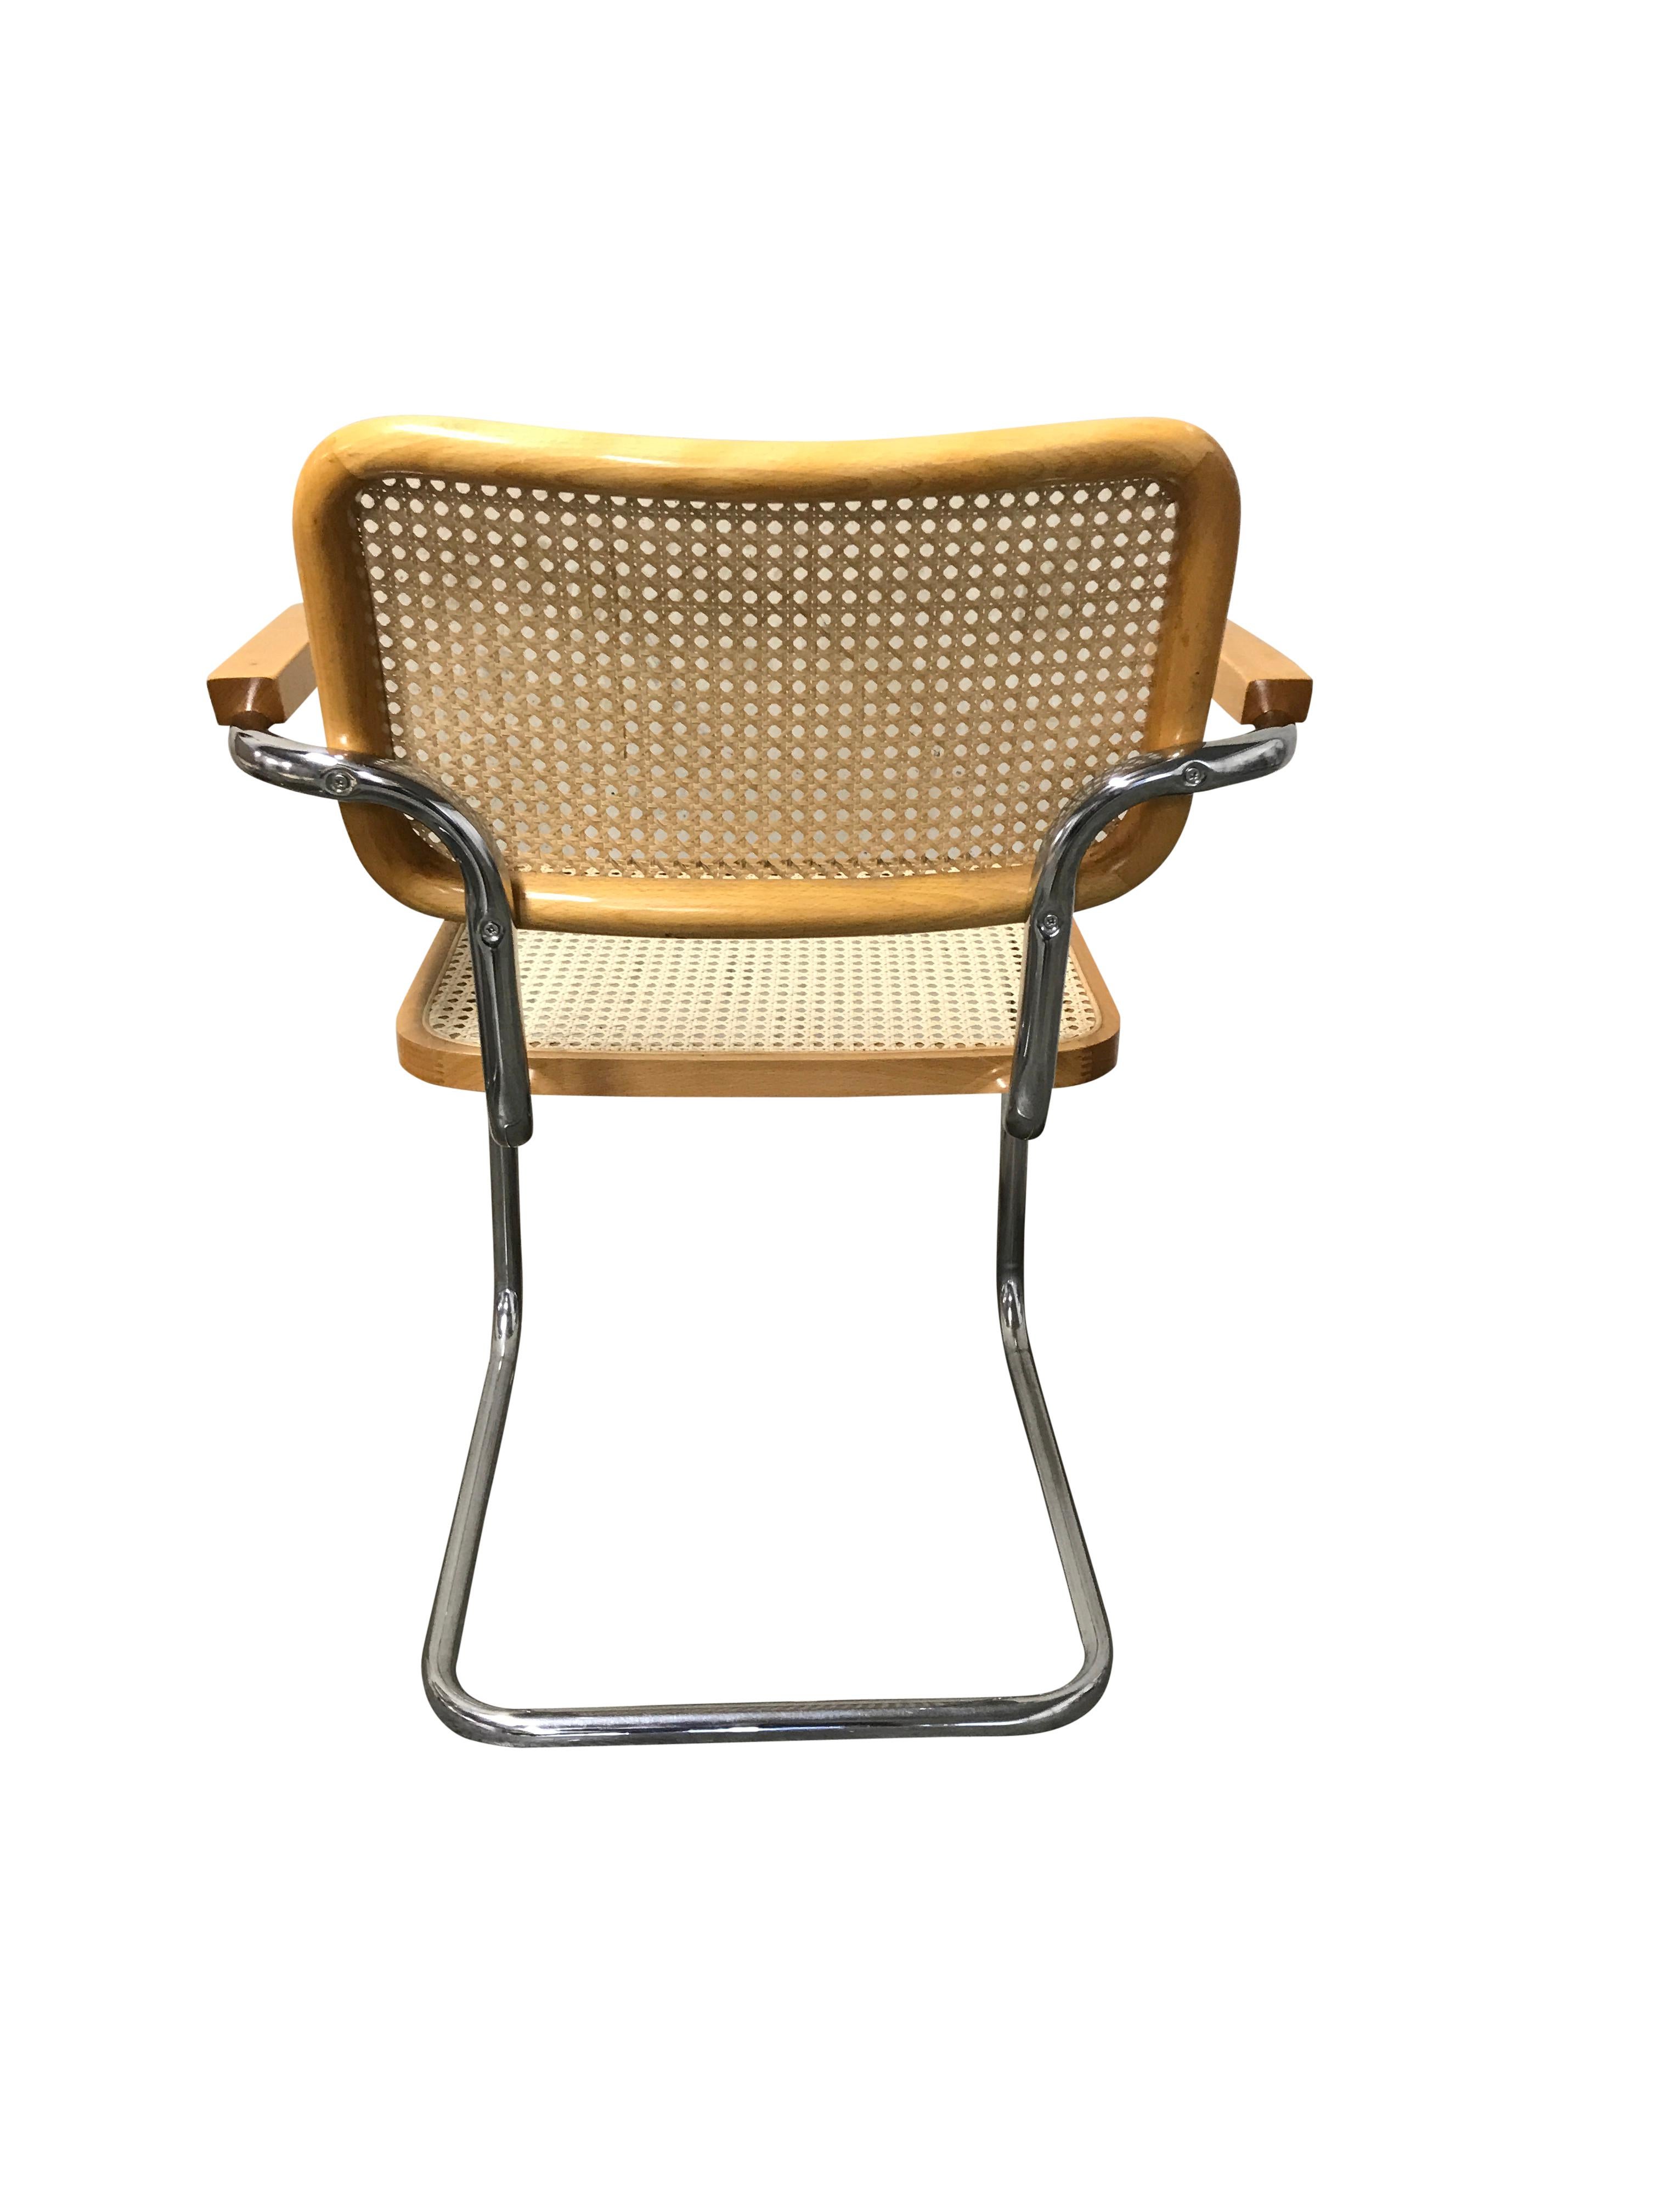 Cane Vintage Marcel Breuer Cesca Chairs, Made in Italy, 1970s